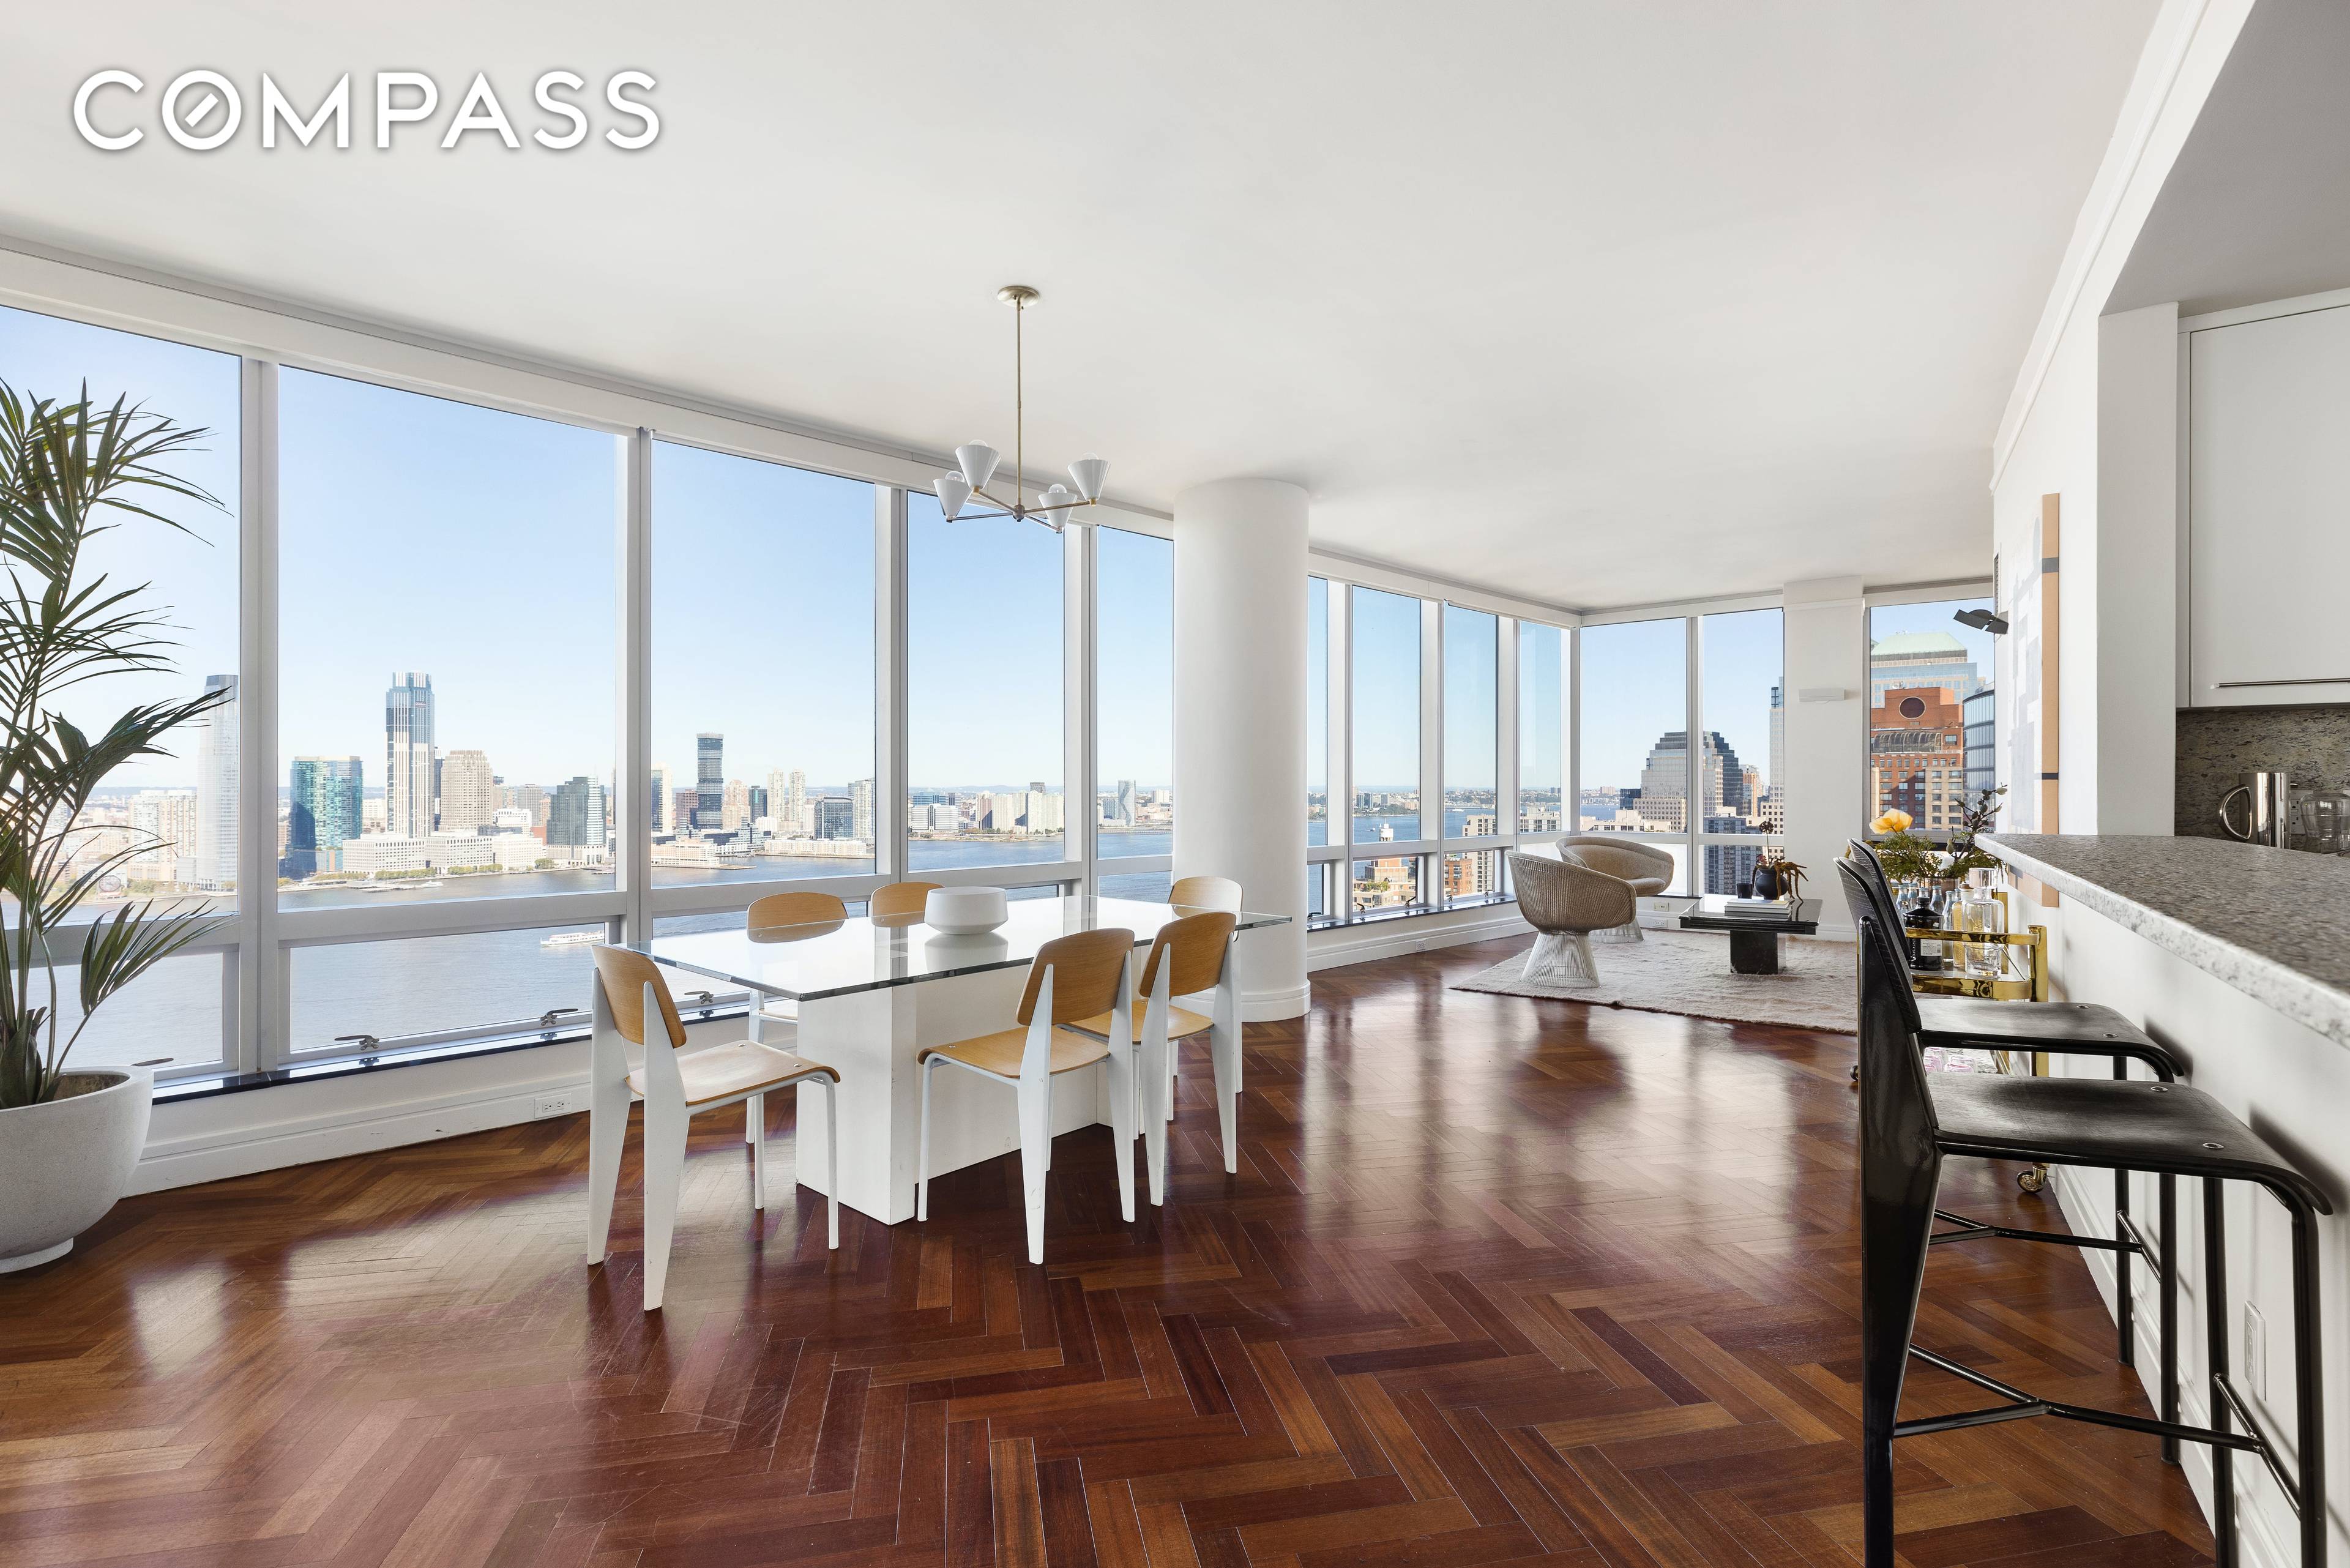 Luxuriate amongst stunning unobstructed river views of the Statue of Liberty and beyond from this high floor three bedroom, three and a half bathroom oasis in the sky at the ...